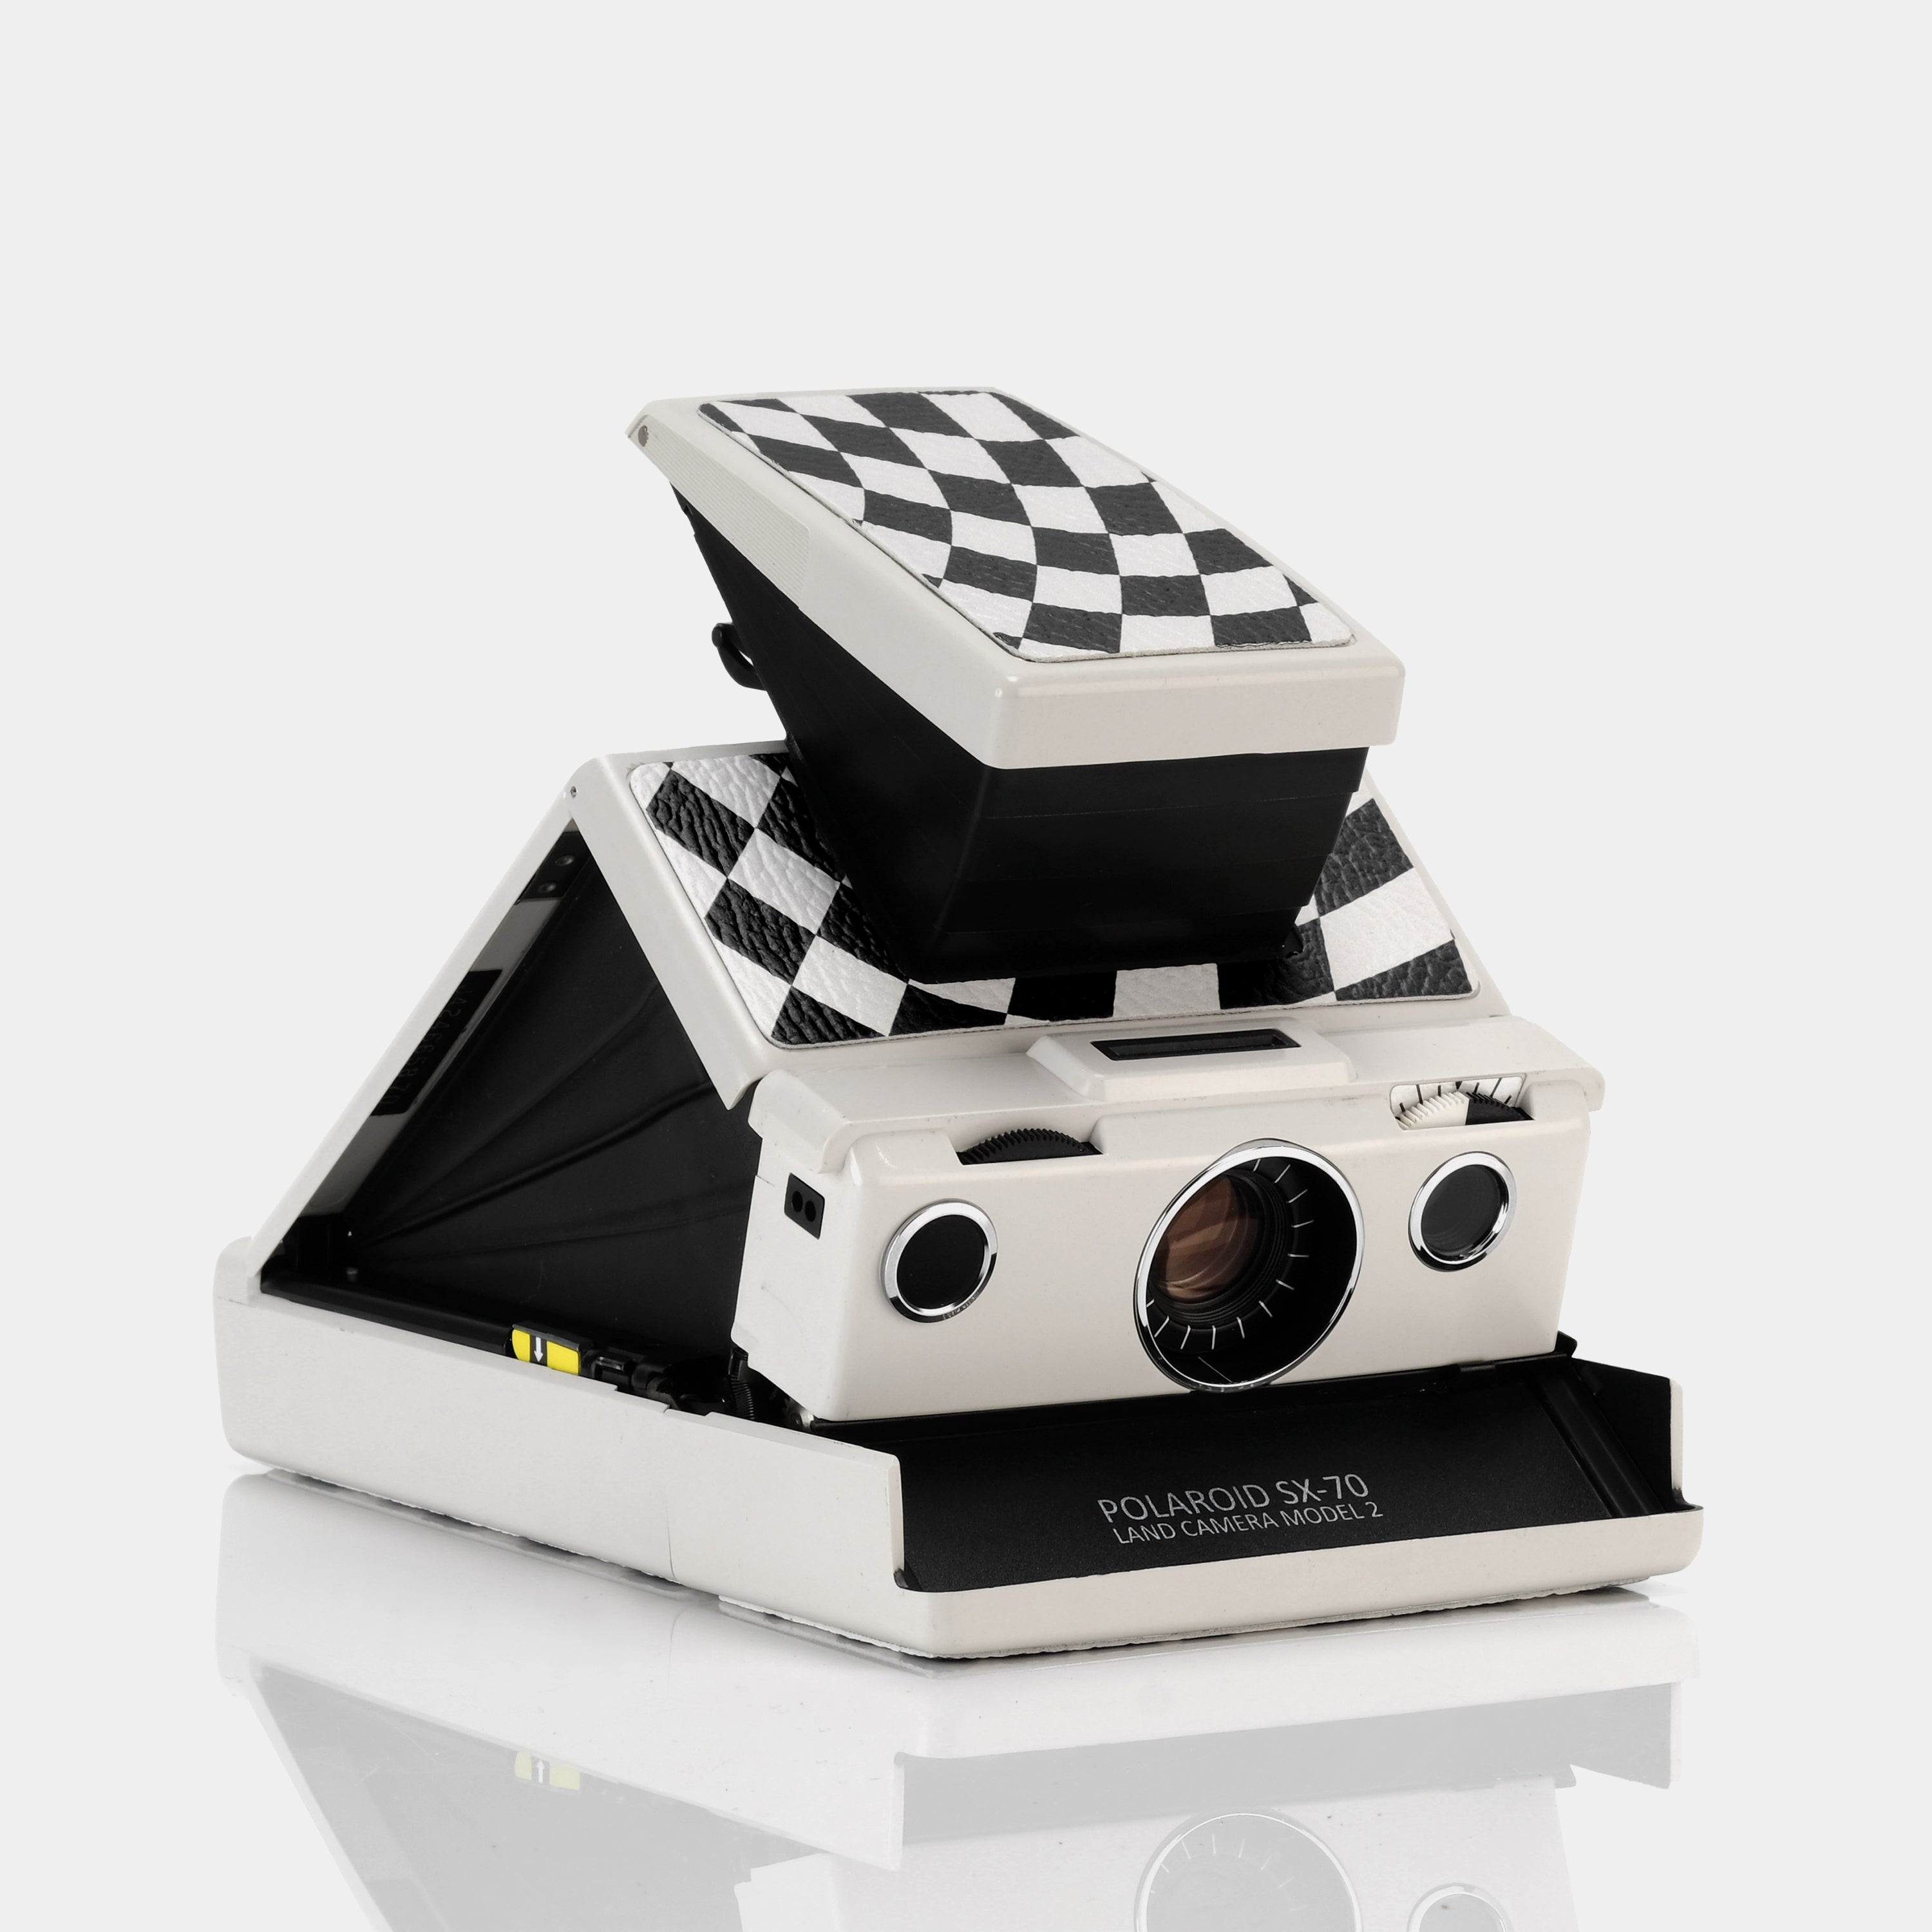 Polaroid SX-70 Model 2 White with Black and Ivory Wave Check Folding Instant Film Camera